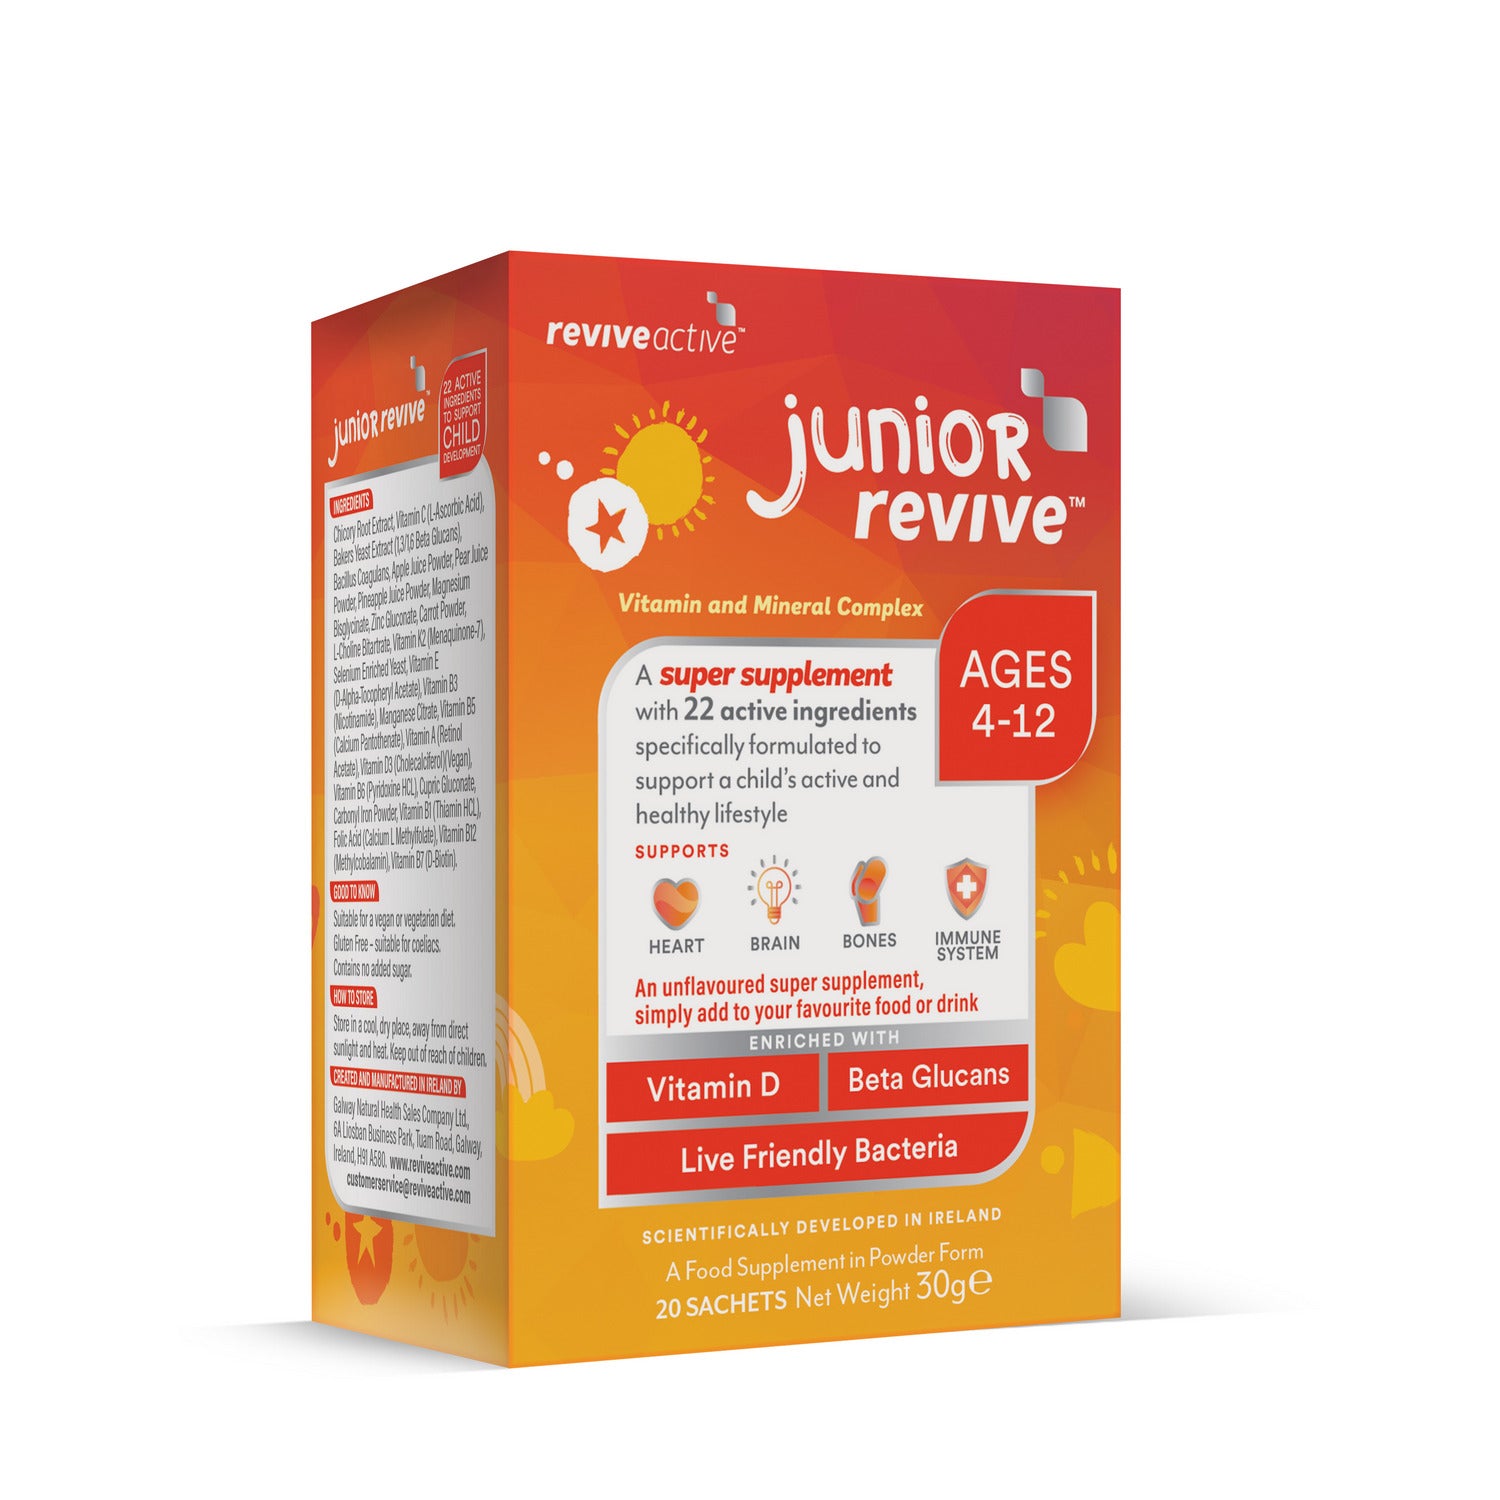 Revive Active Junior Vitamin and Mineral Complex 20 Sachets (Buy 1 Get 1 Half Price)